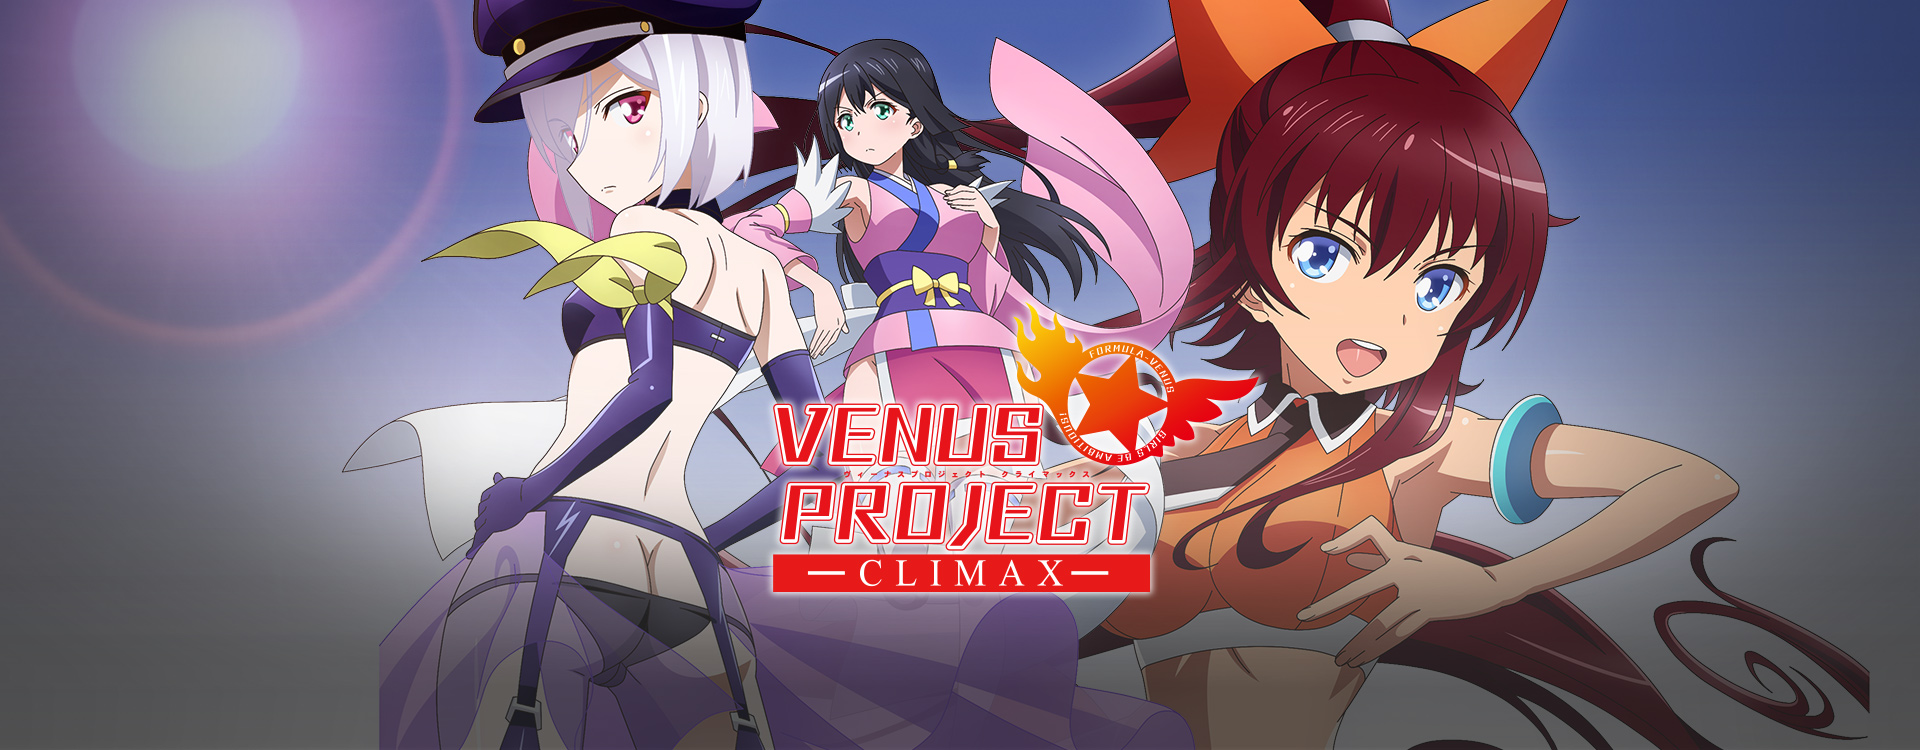 Watch Venus Project Climax Sub Dub Comedy Slice Of Life Anime Funimation